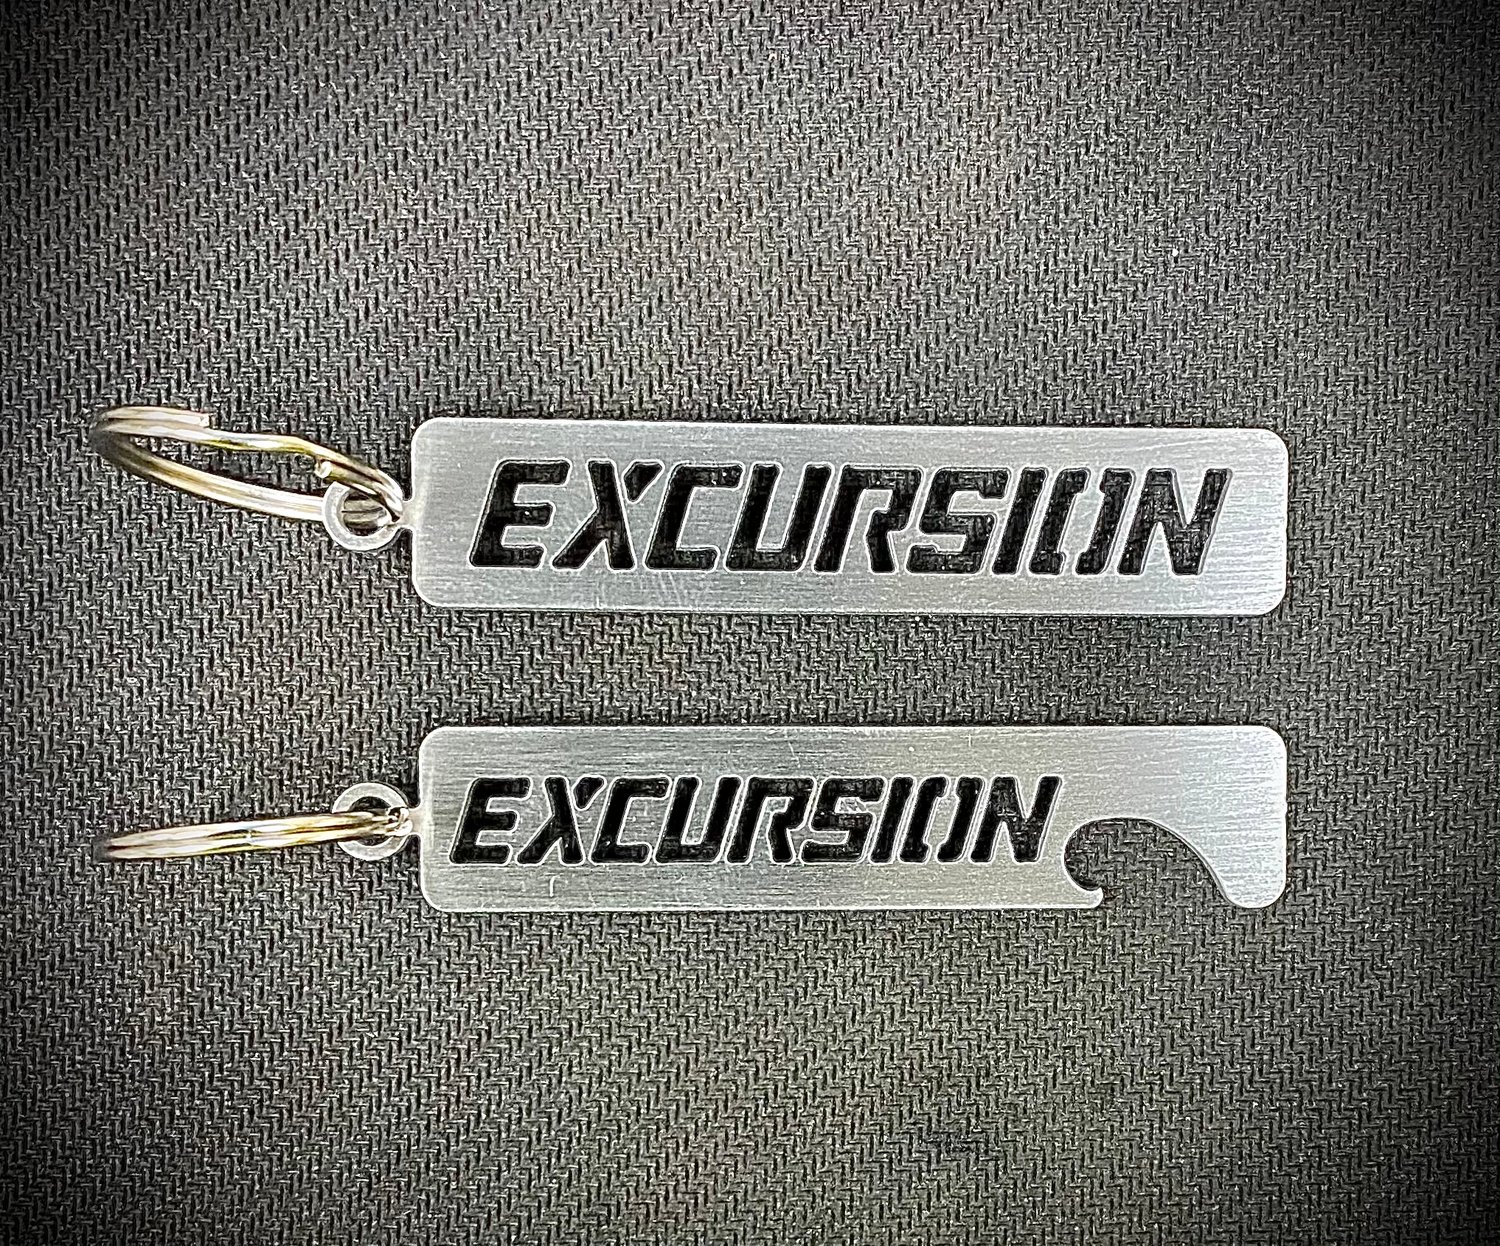 For Excursion Enthusiasts 